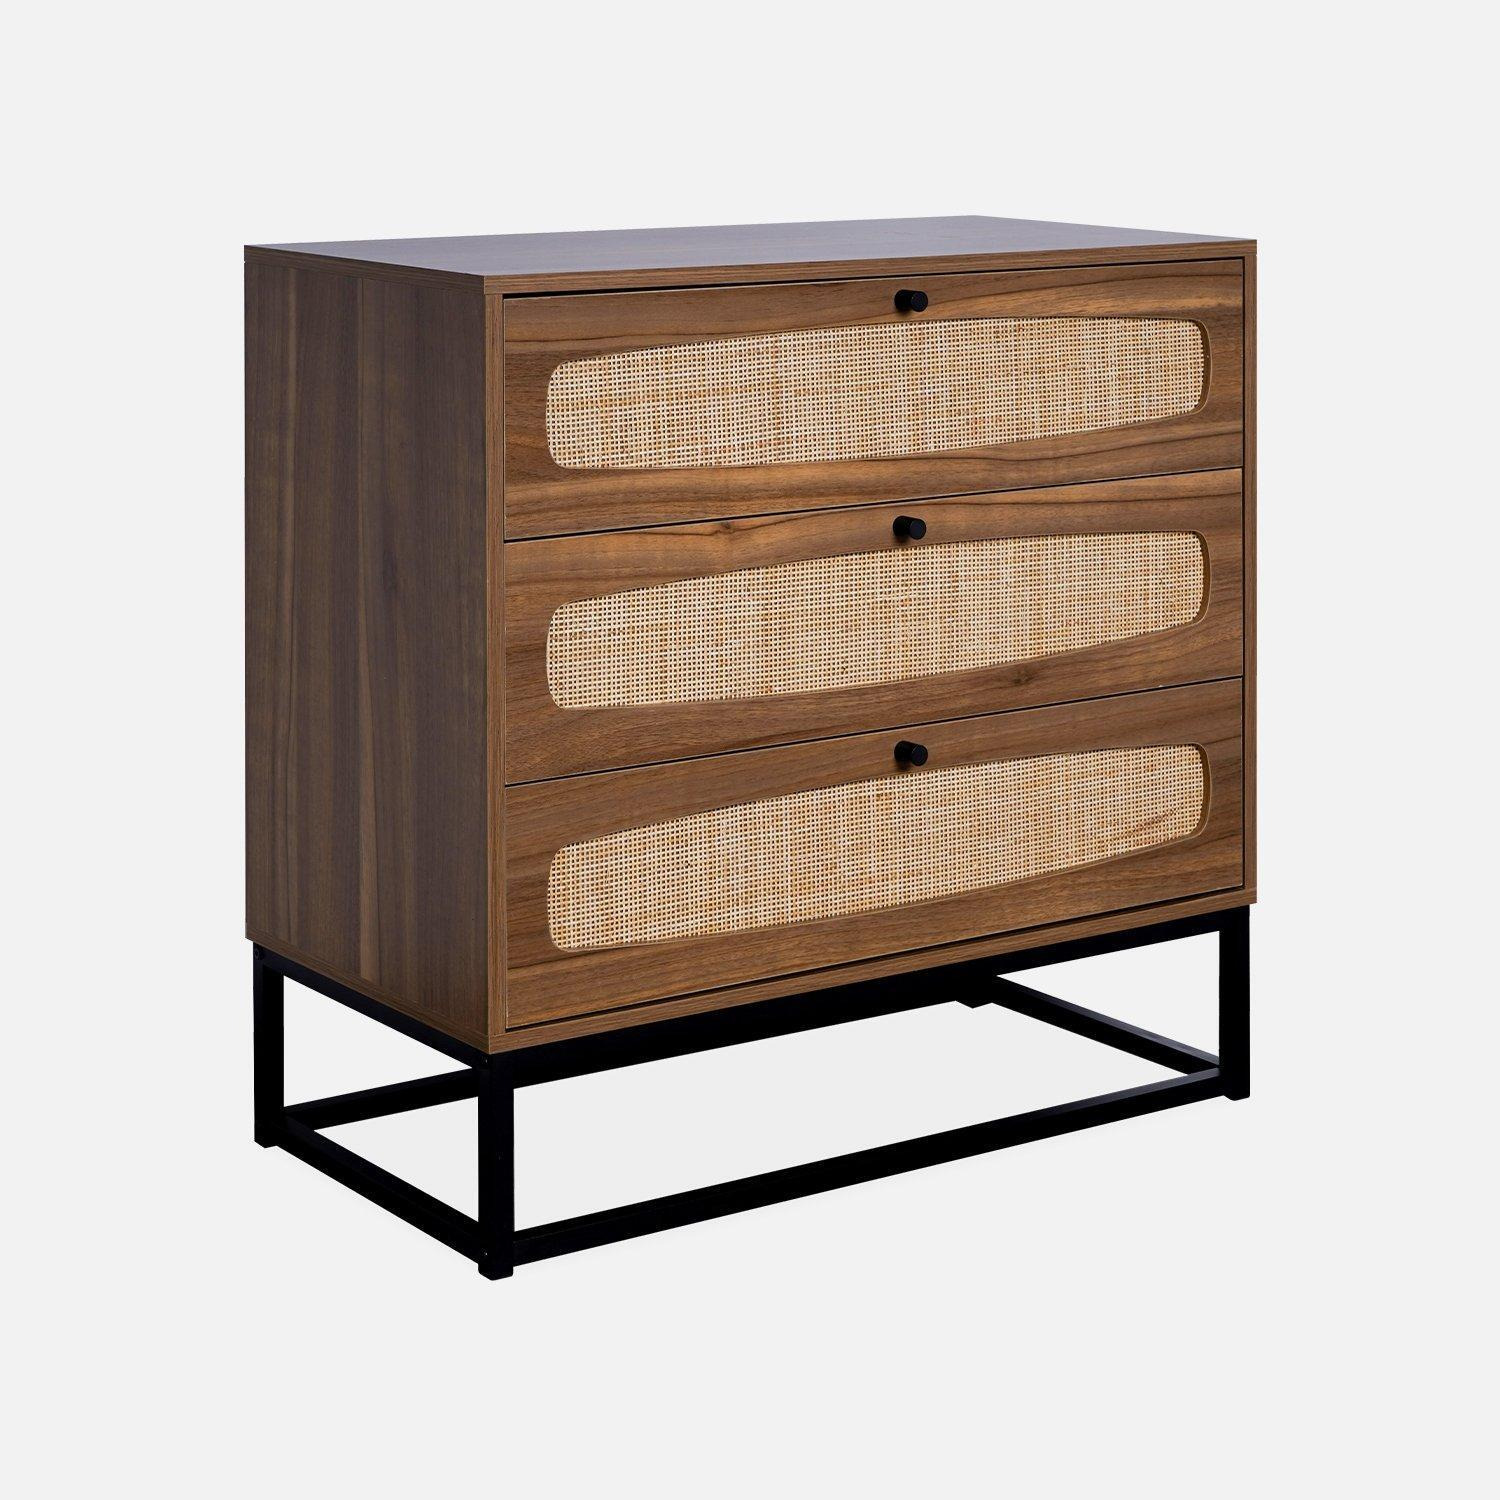 Wood And Cane Chest Of Drawers 3 Drawers - image 1